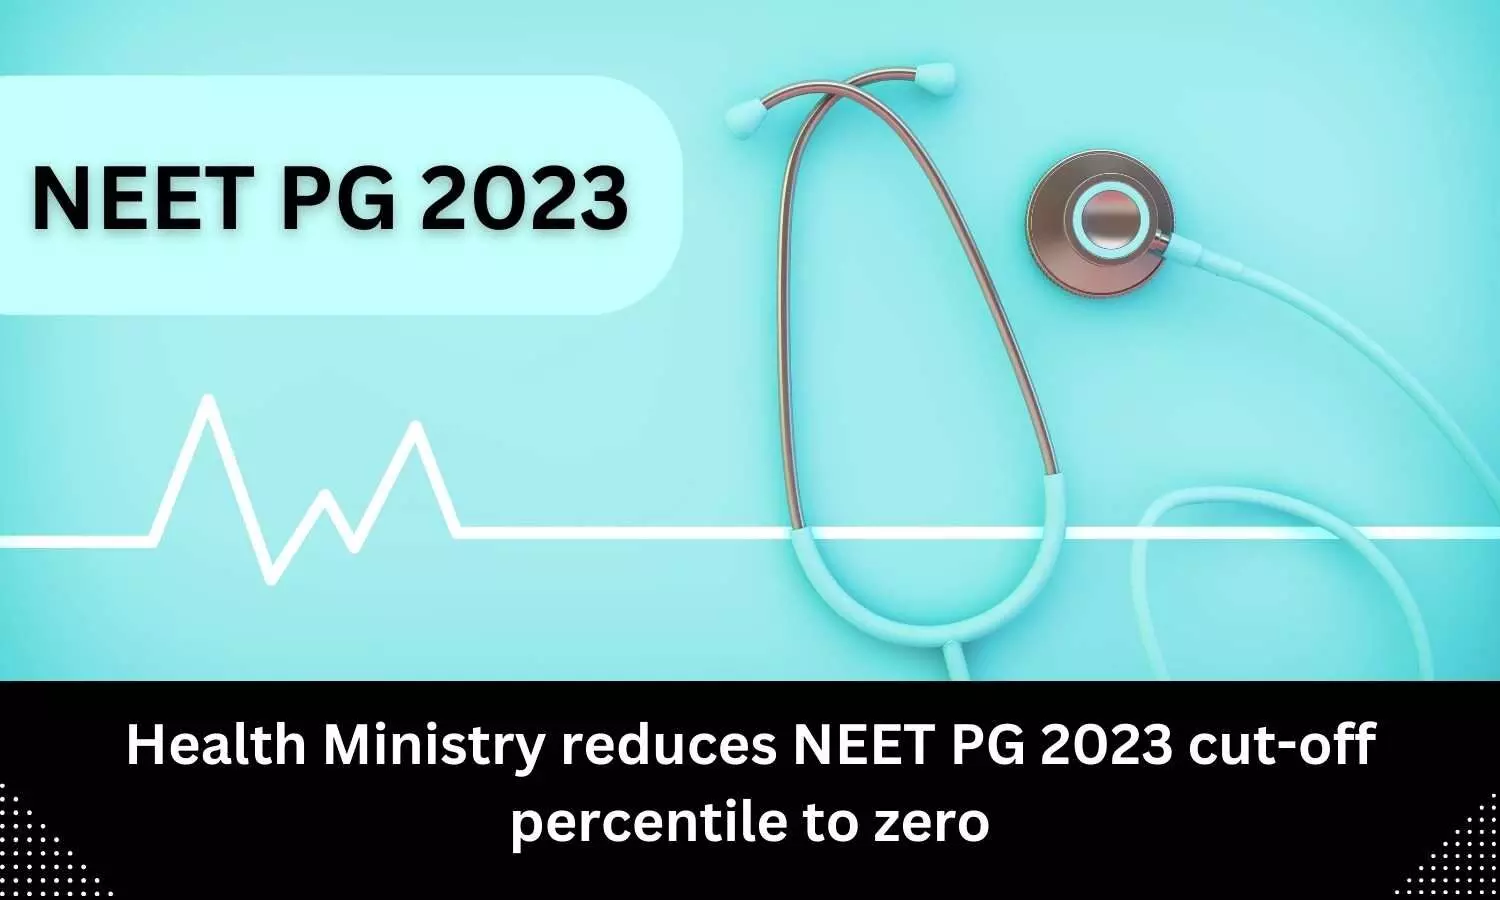 NEET PG 2023 cut off percentile reduced to zero by Health Ministry